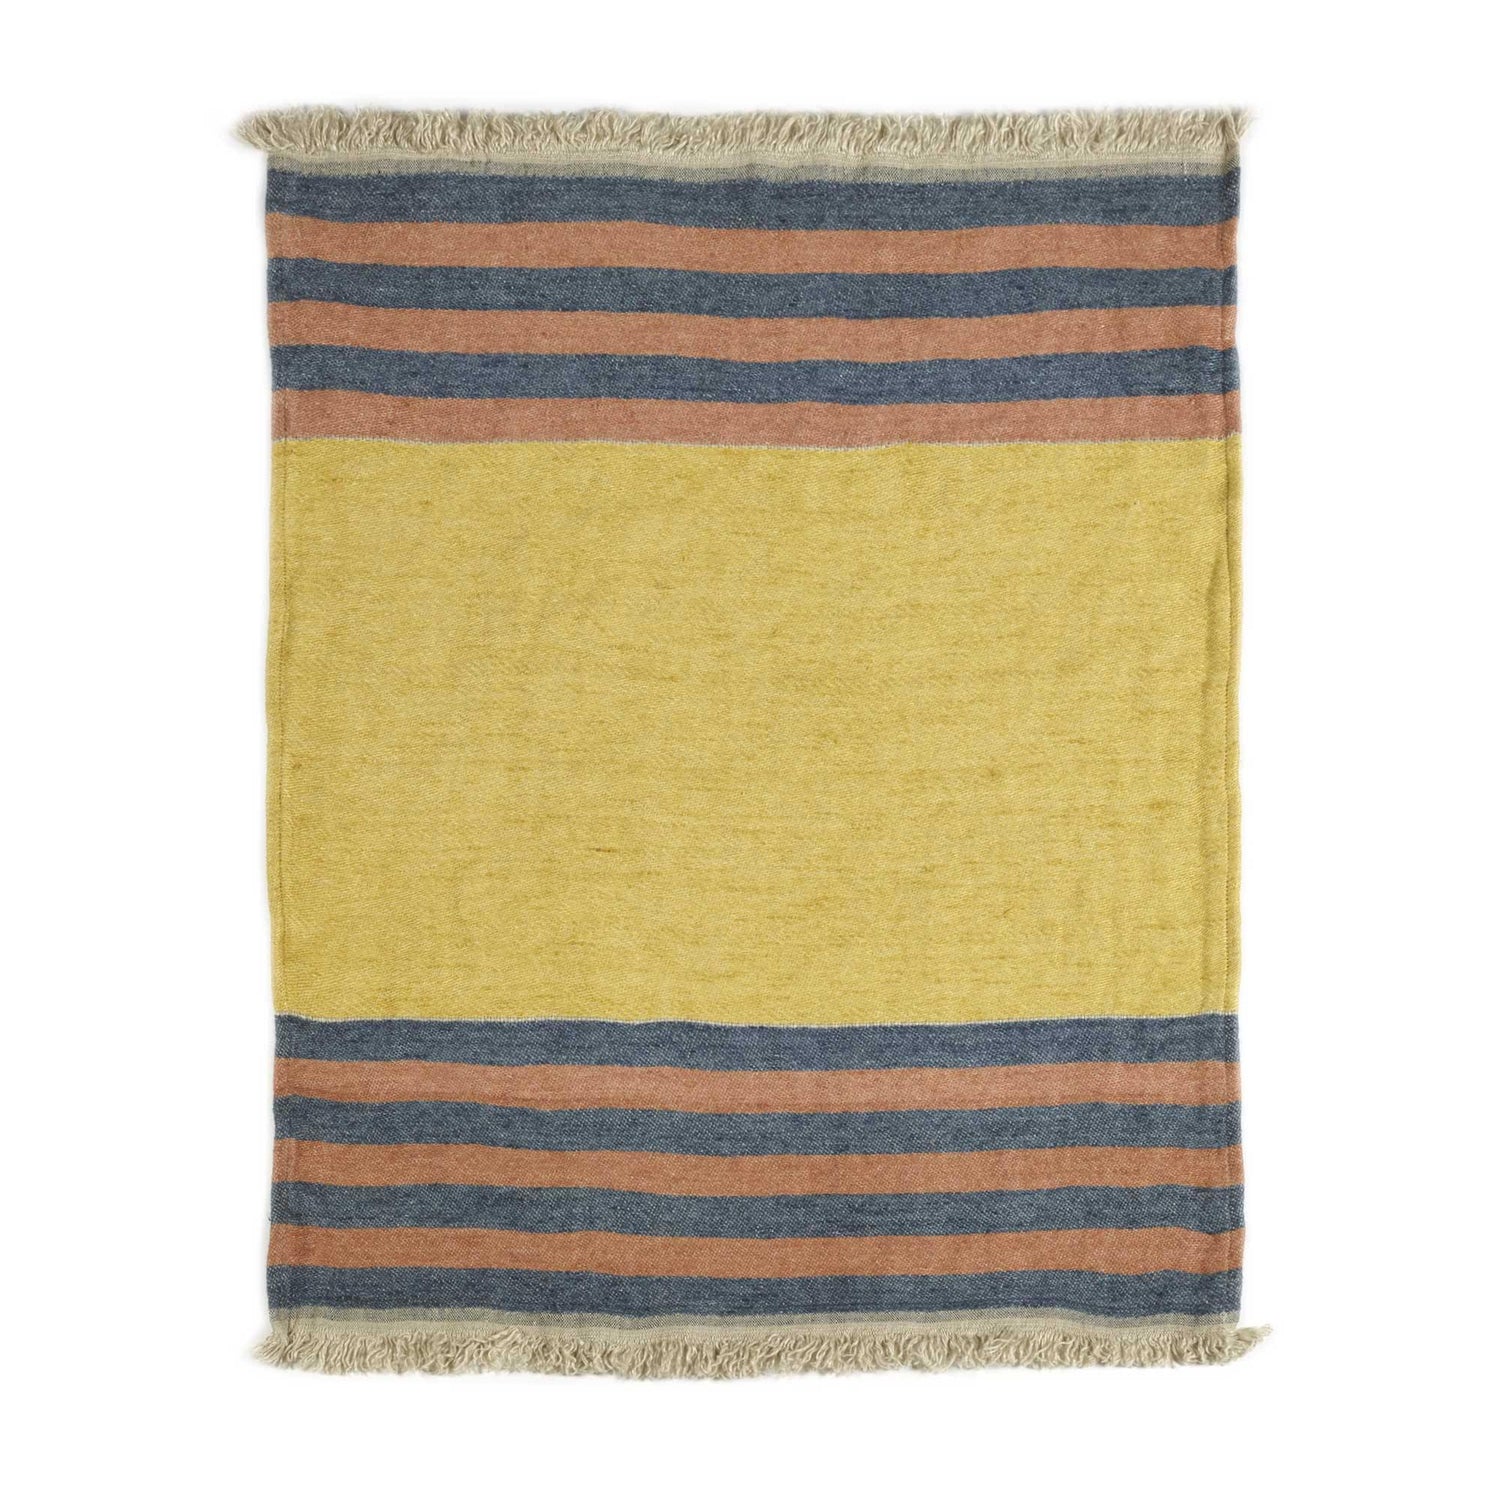 Belgian linen fouta throw blanket flat lay product shot in color Red Earth by Libeco for South Hous.